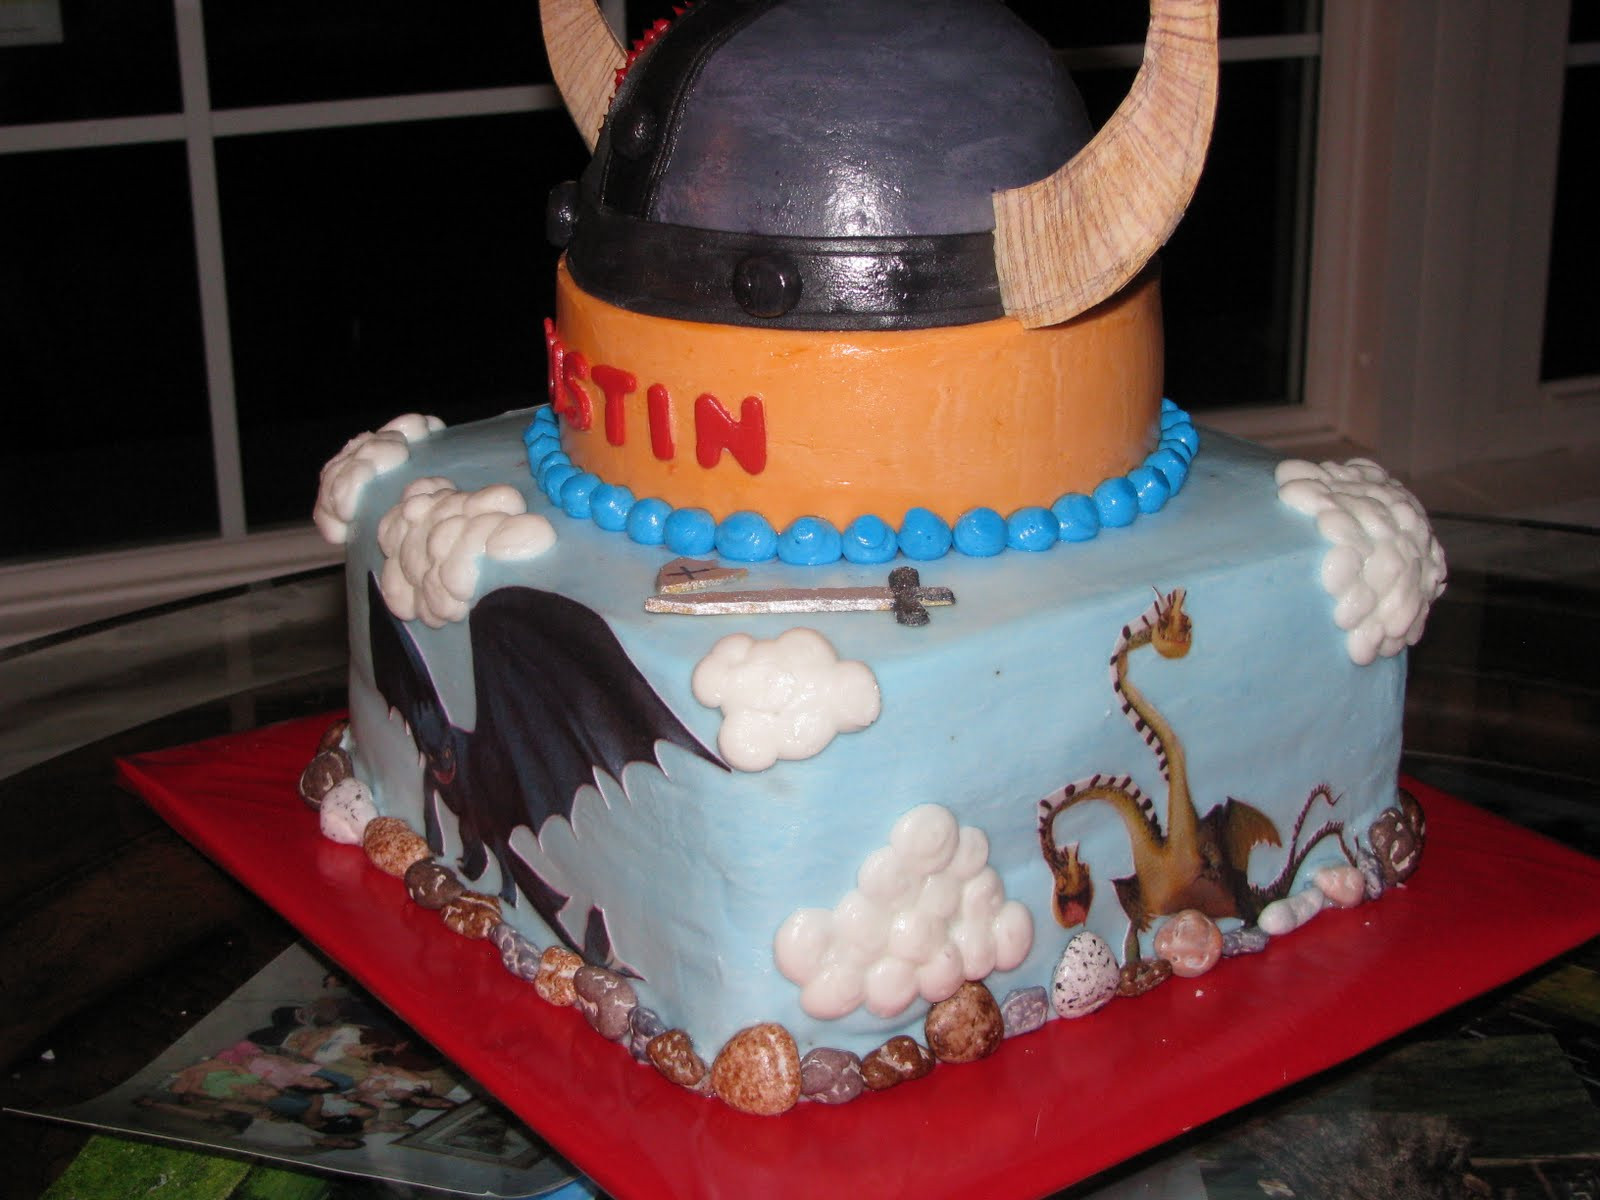 How To Train Your Dragon Birthday Cake
 Love "Eden" Cake How To Train Your Dragon Cake